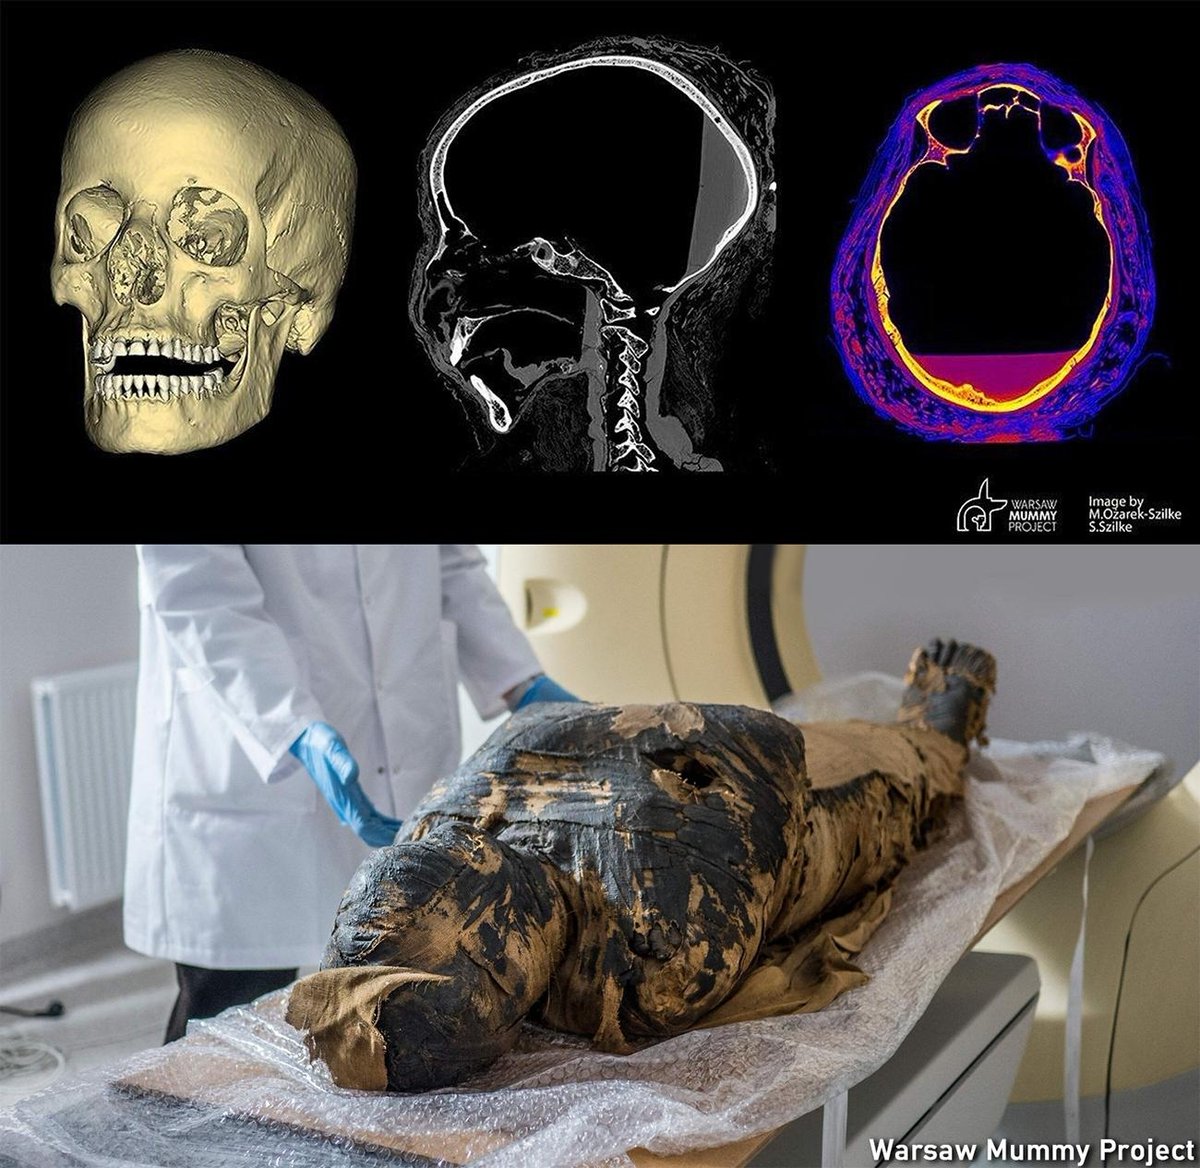 Mummy of the Mysterious Lady may have died of cancer

A team of researchers with the Warsaw Mummy Project, has announced on their webpage that a #mummy in their collection that has come to be known as the Mysterious Lady may have had #nasopharyngealcancer.